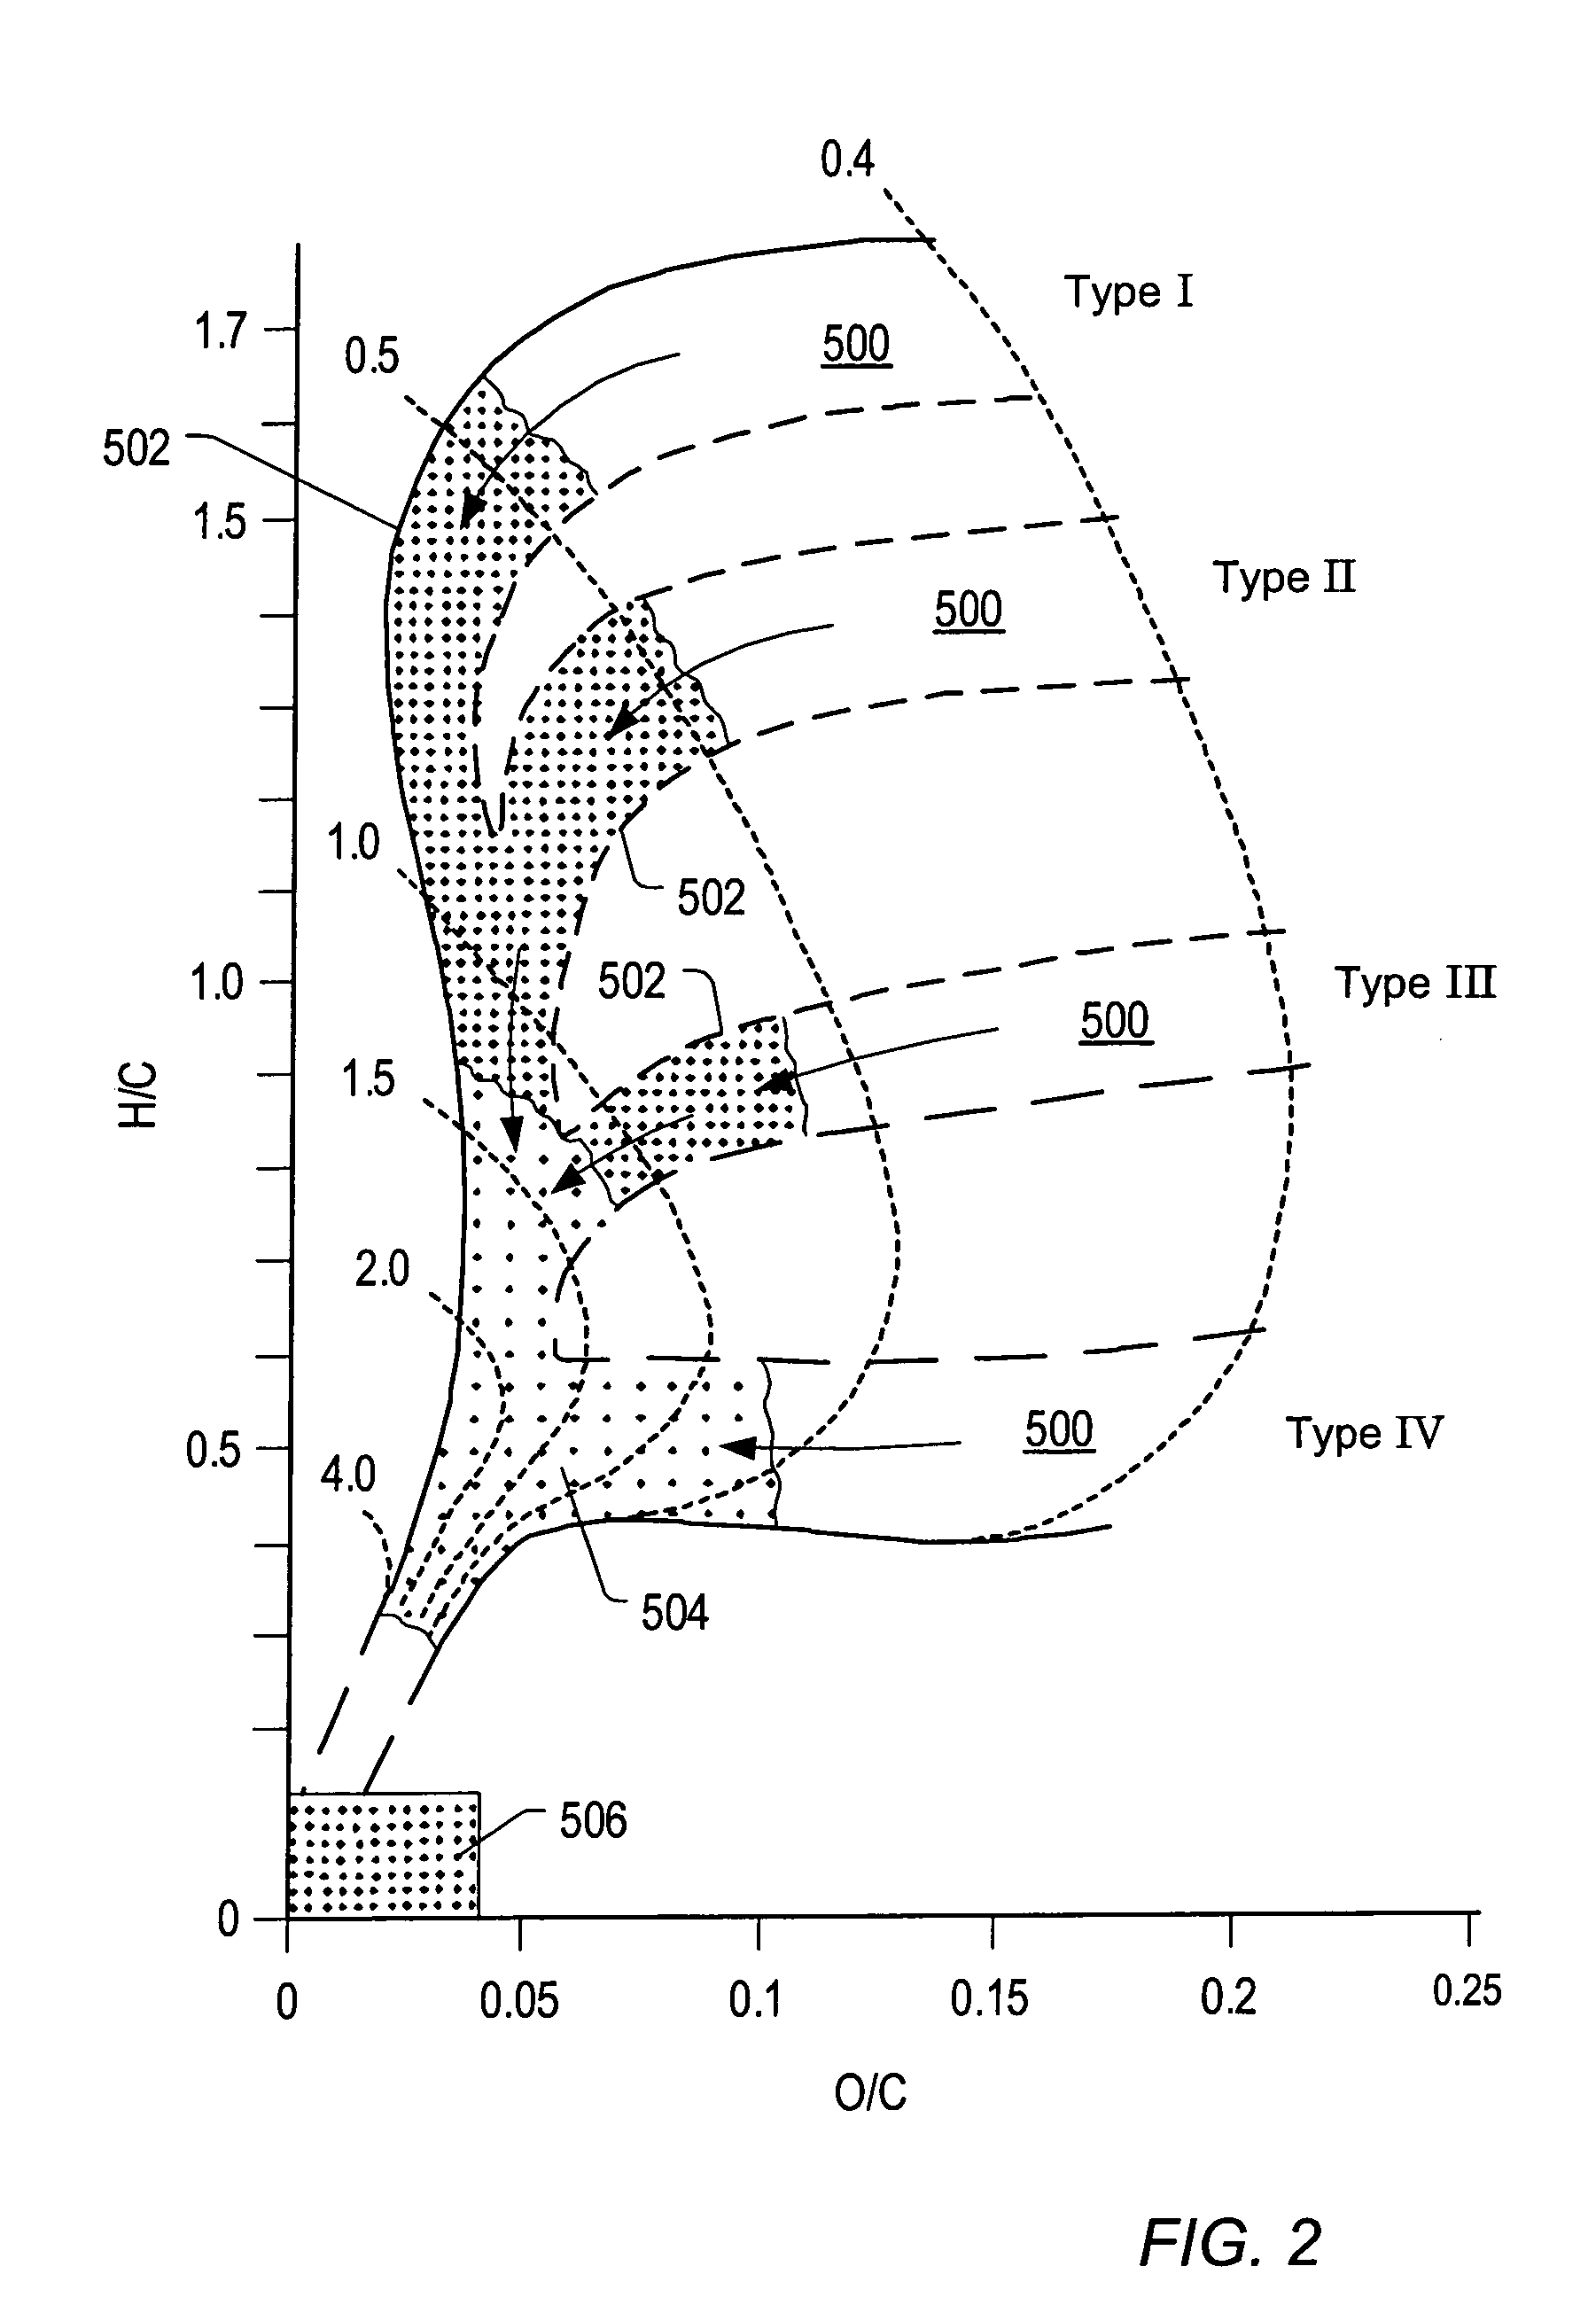 Staged and/or patterned heating during in situ thermal processing of a hydrocarbon containing formation